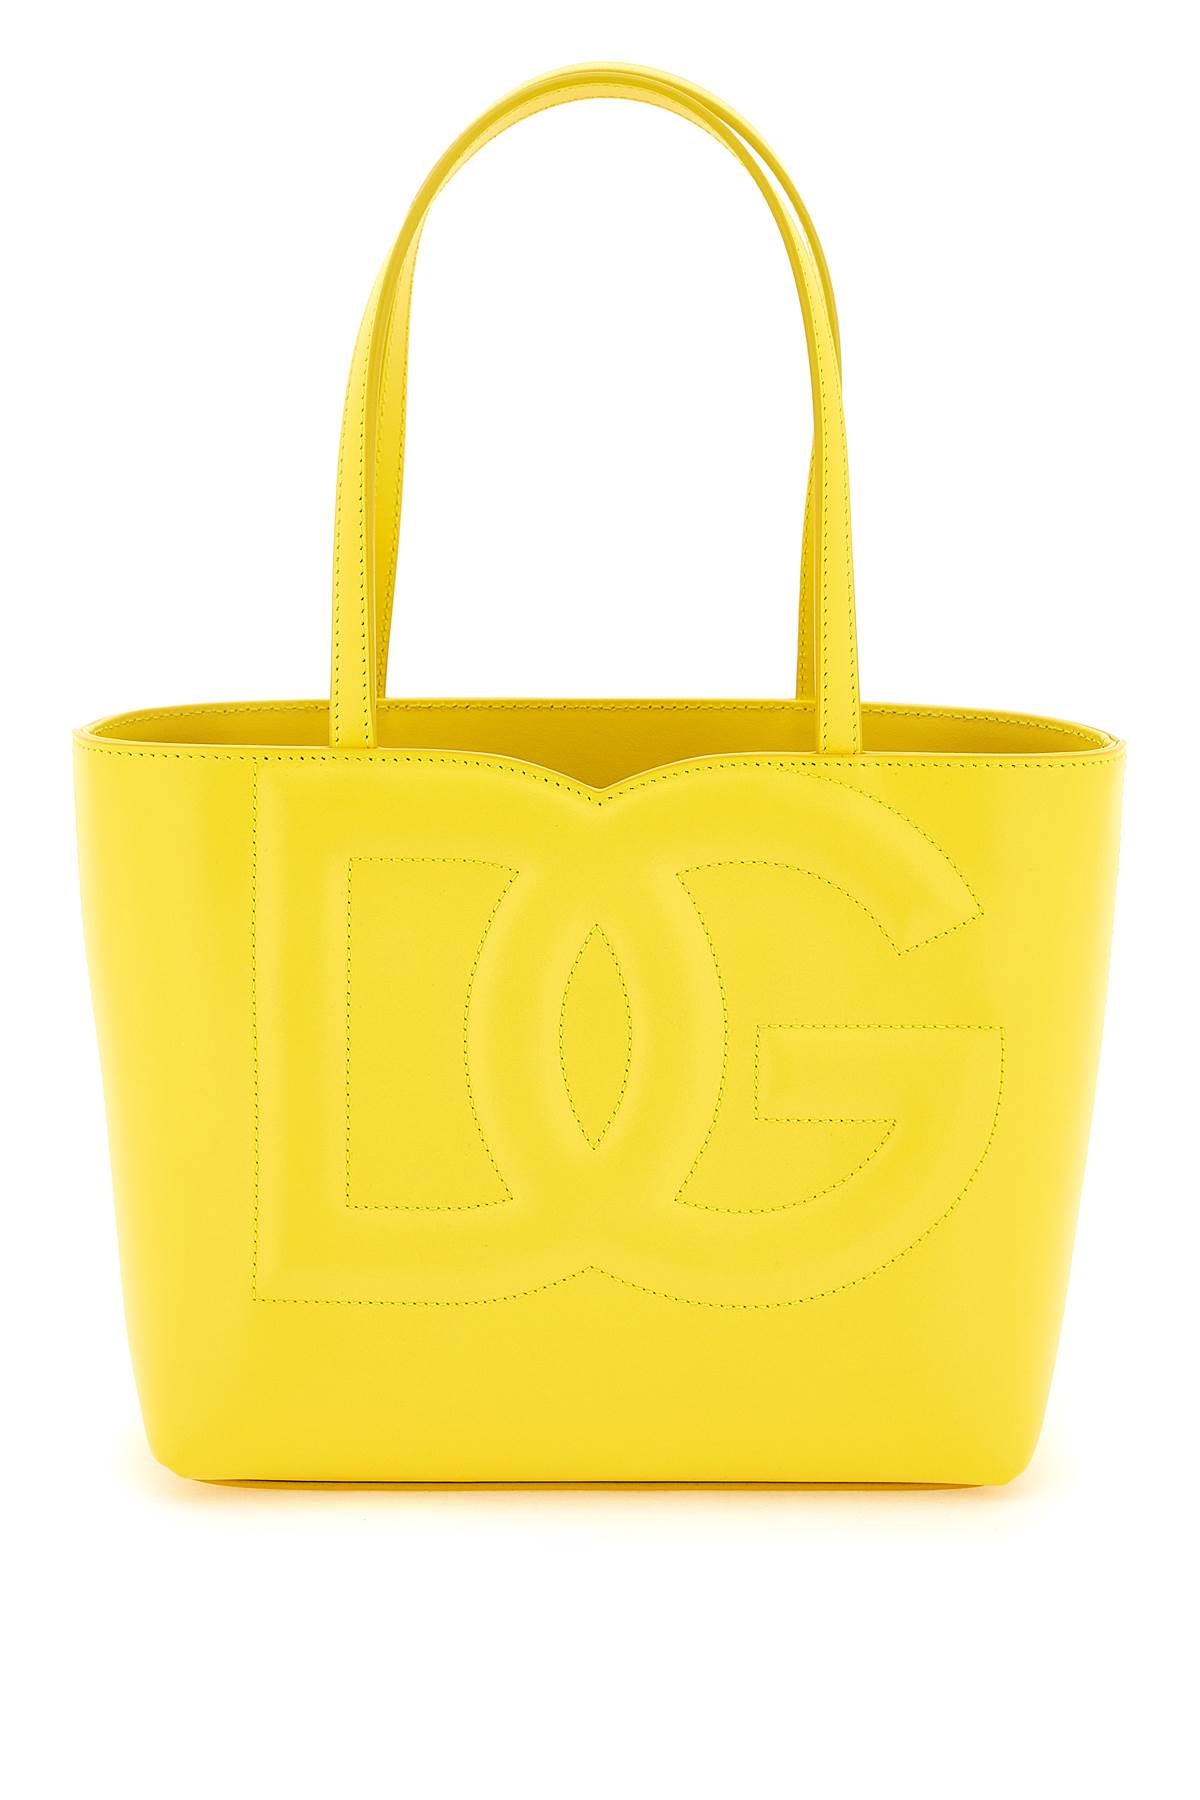 Dolce & gabbana leather tote bag with logo-0